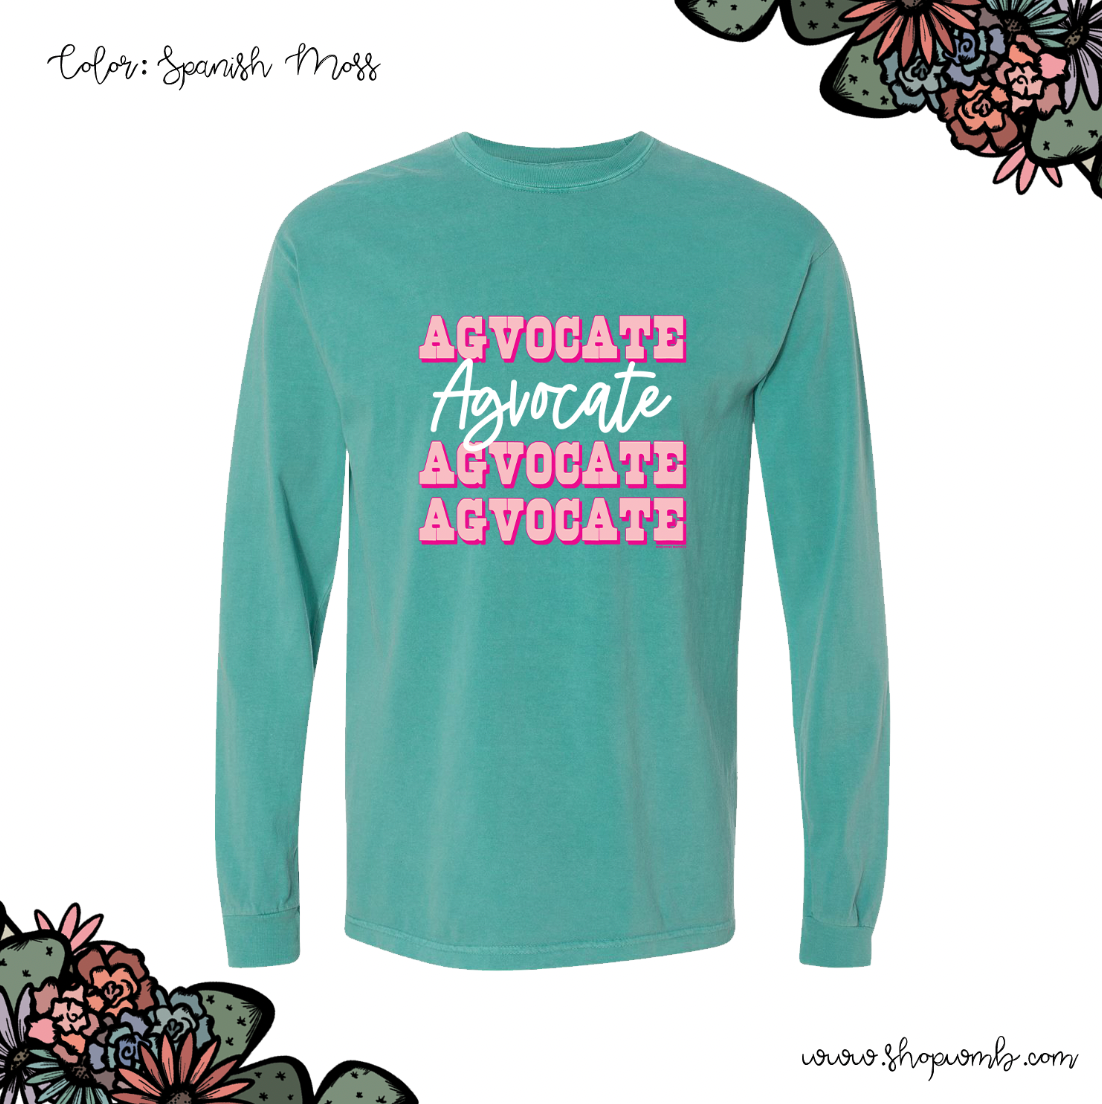 Western Agvocate LONG SLEEVE T-Shirt (S-3XL) - Multiple Colors!